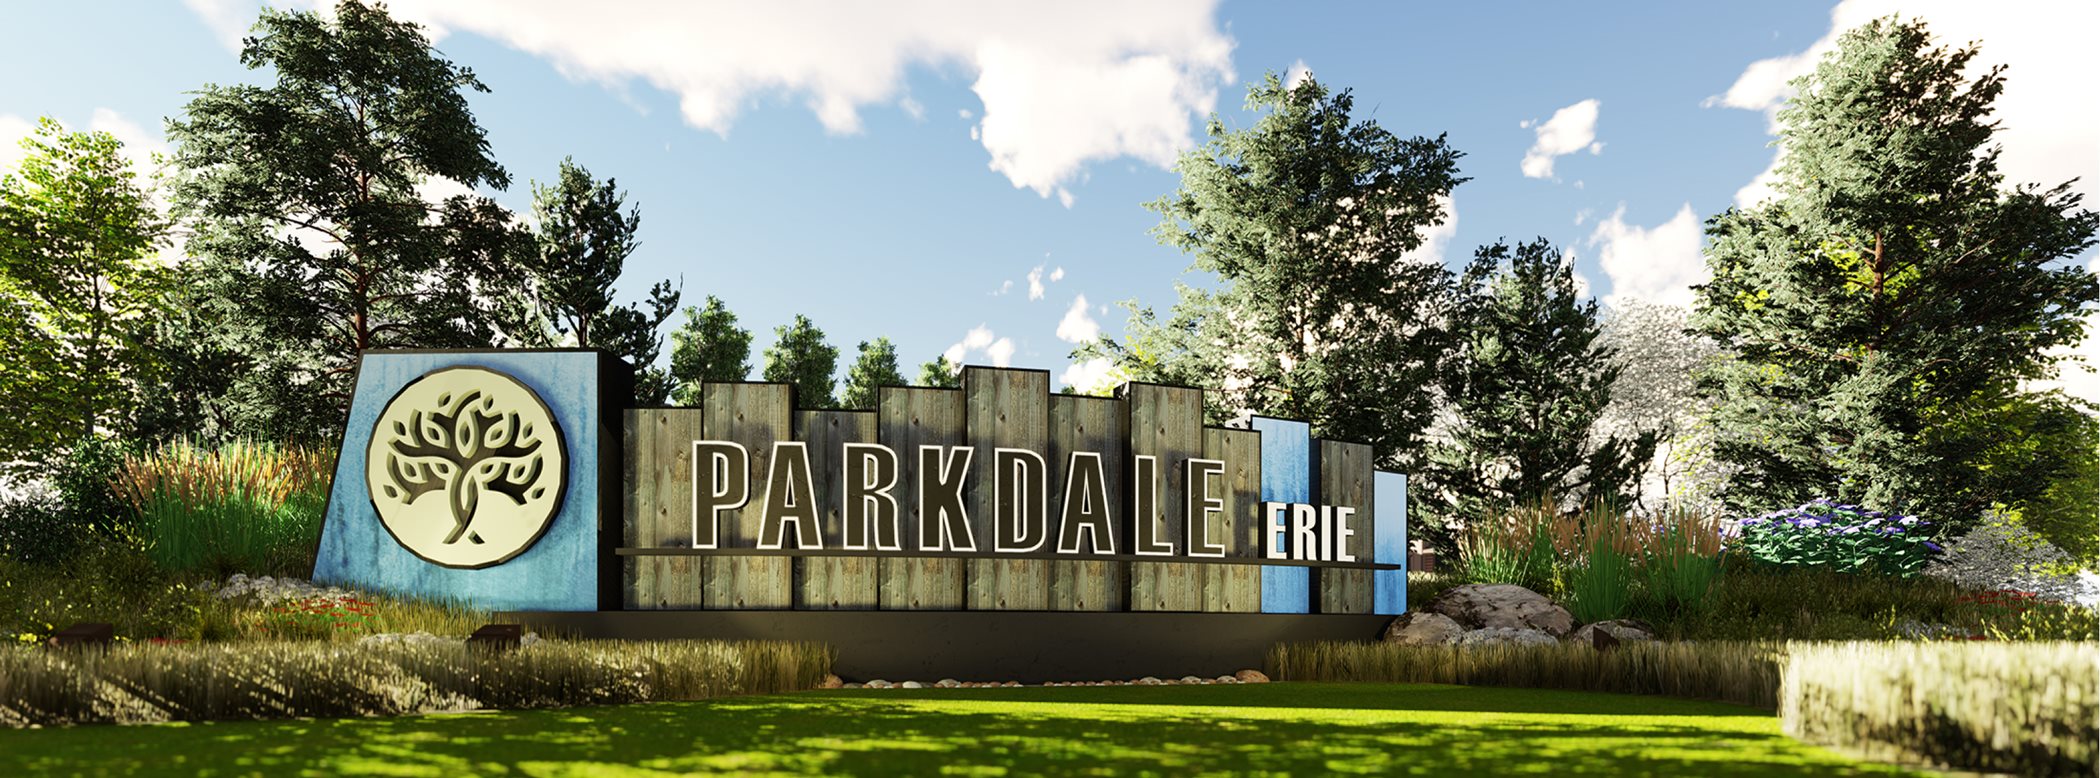 Parkdale masterplan monument sign